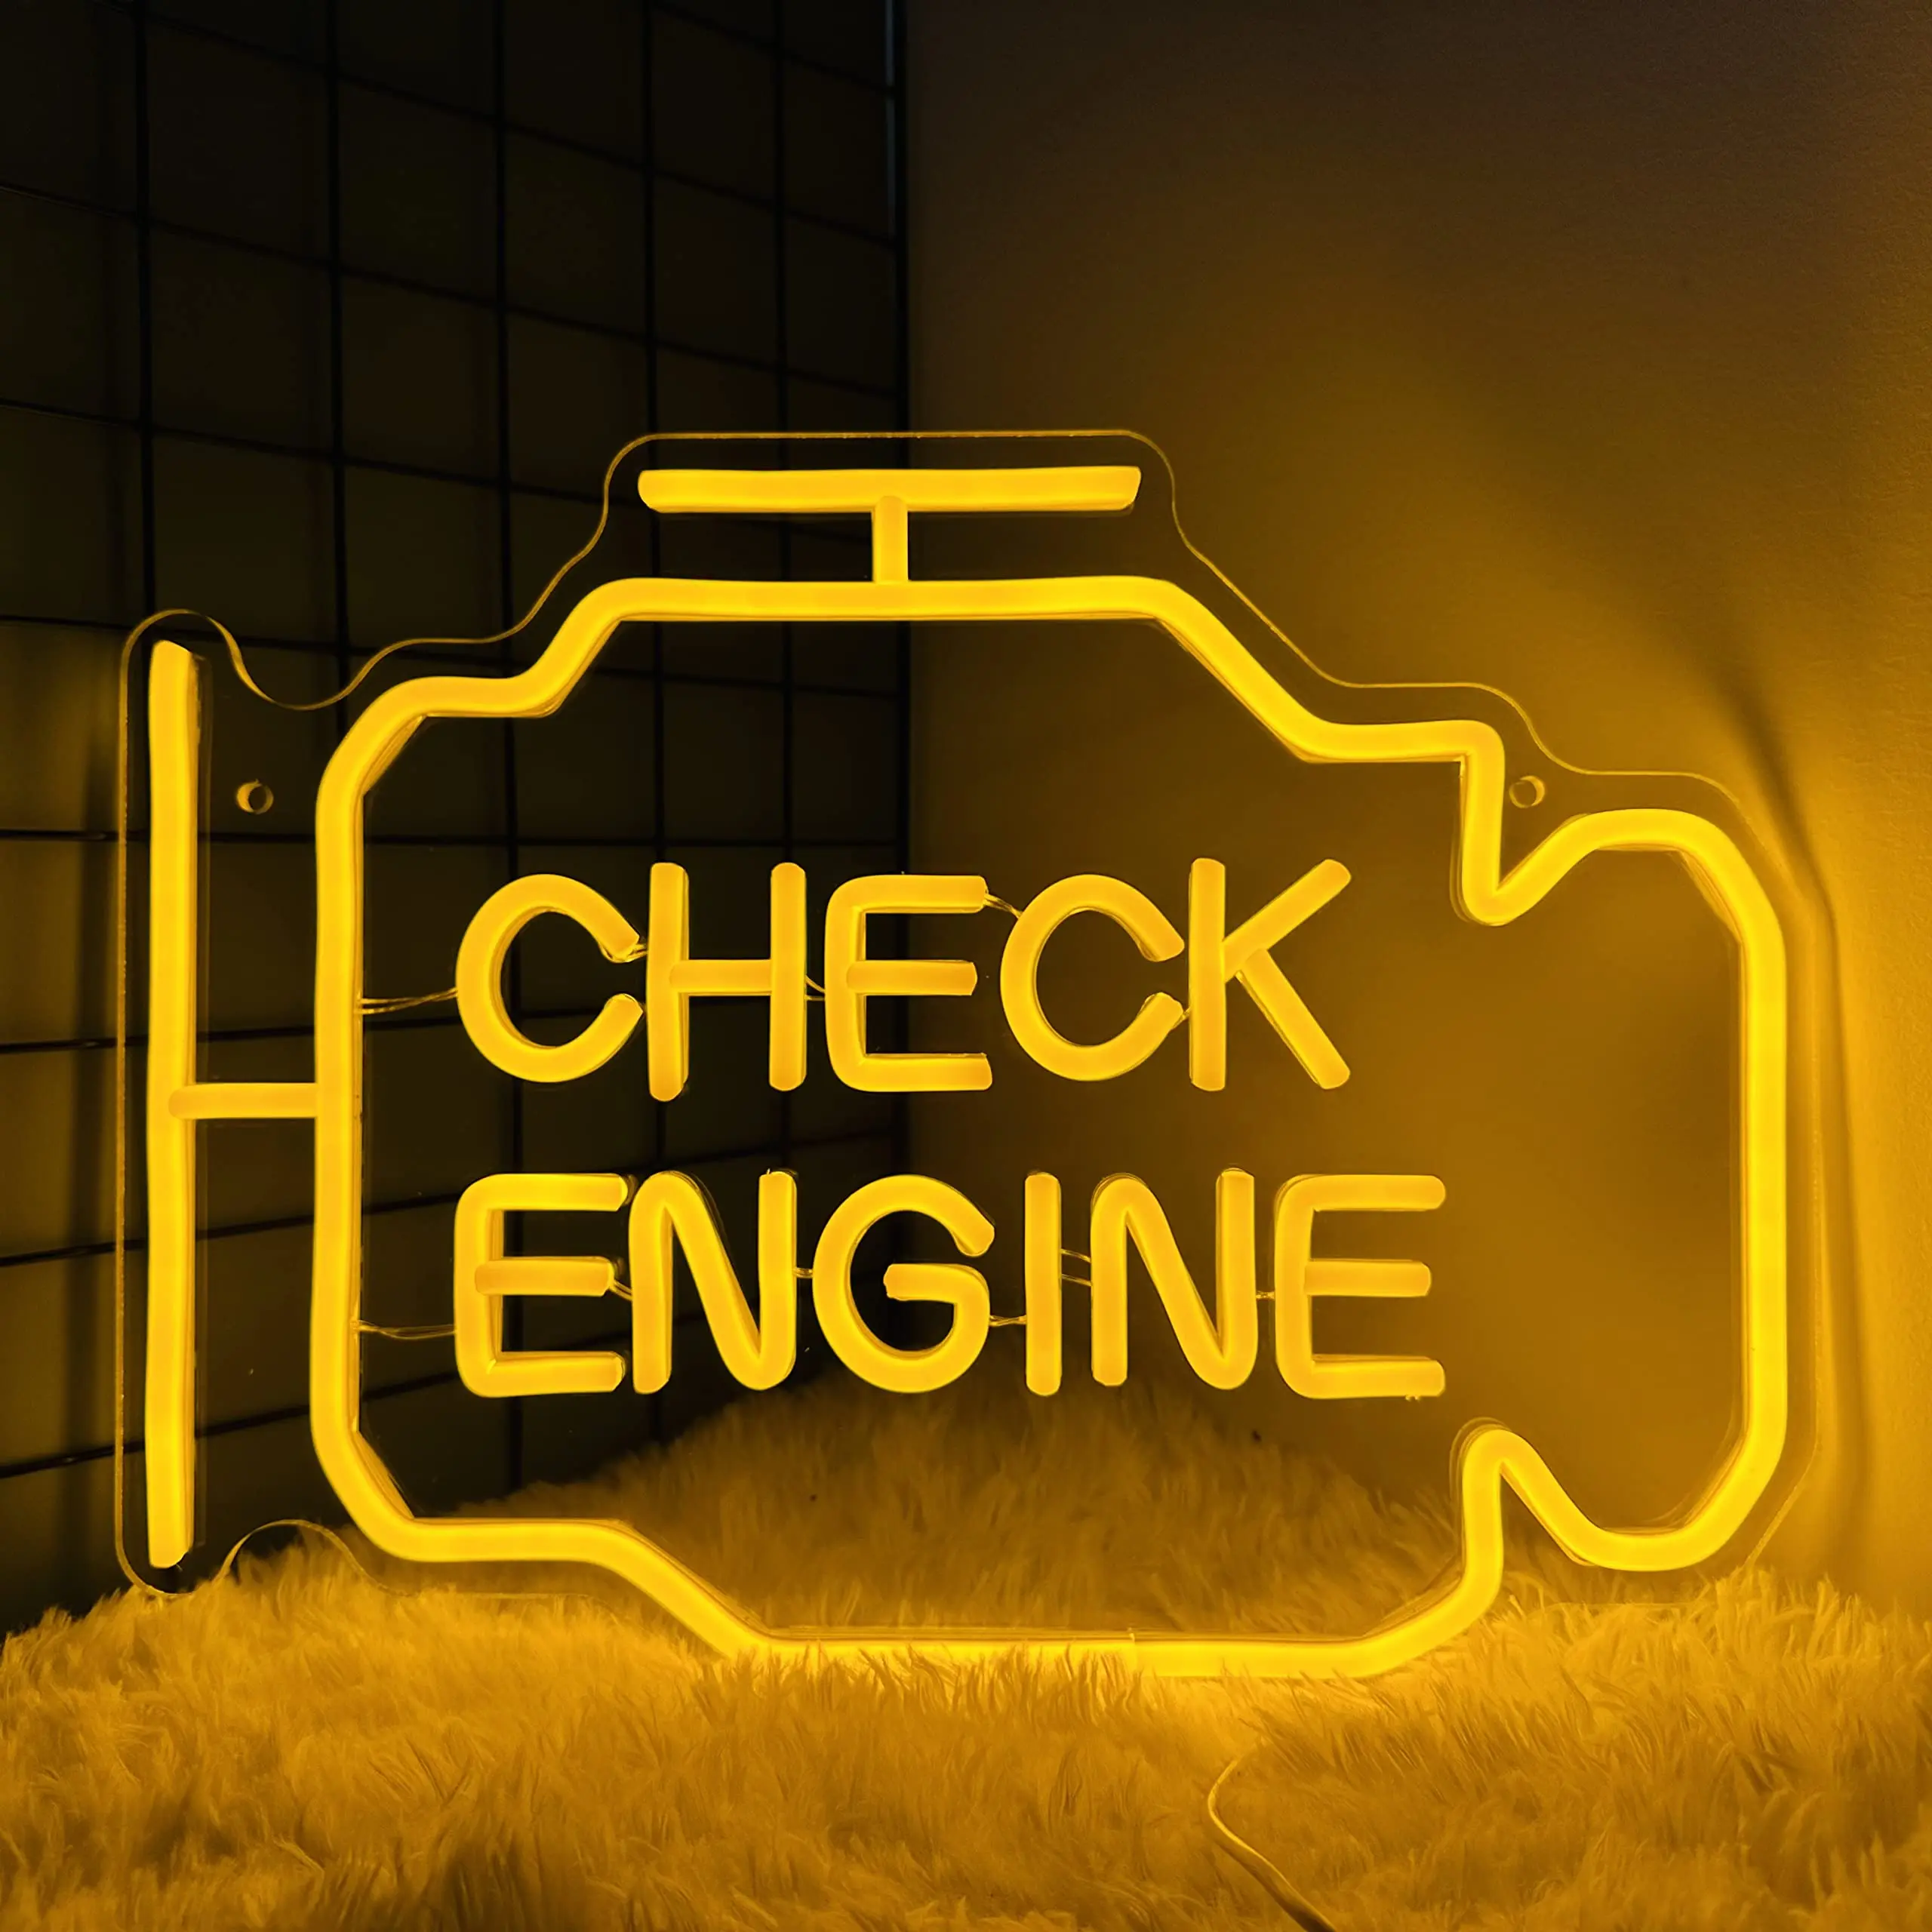 

Check engine neon sign wall decoration, personalized LED neon garage sign, car room repair shop workshop game room party